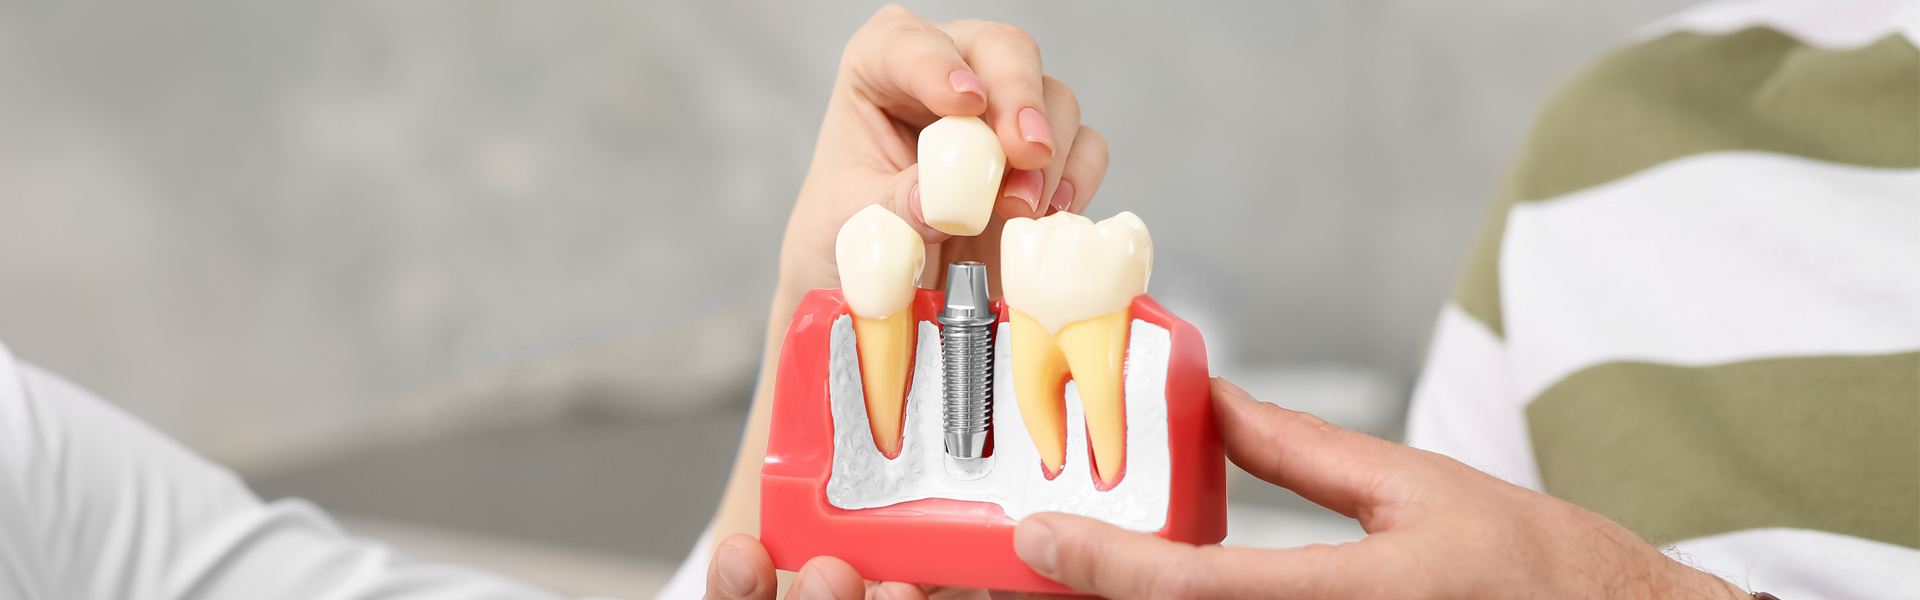 What Is Full Mouth Dental Implants Treatment